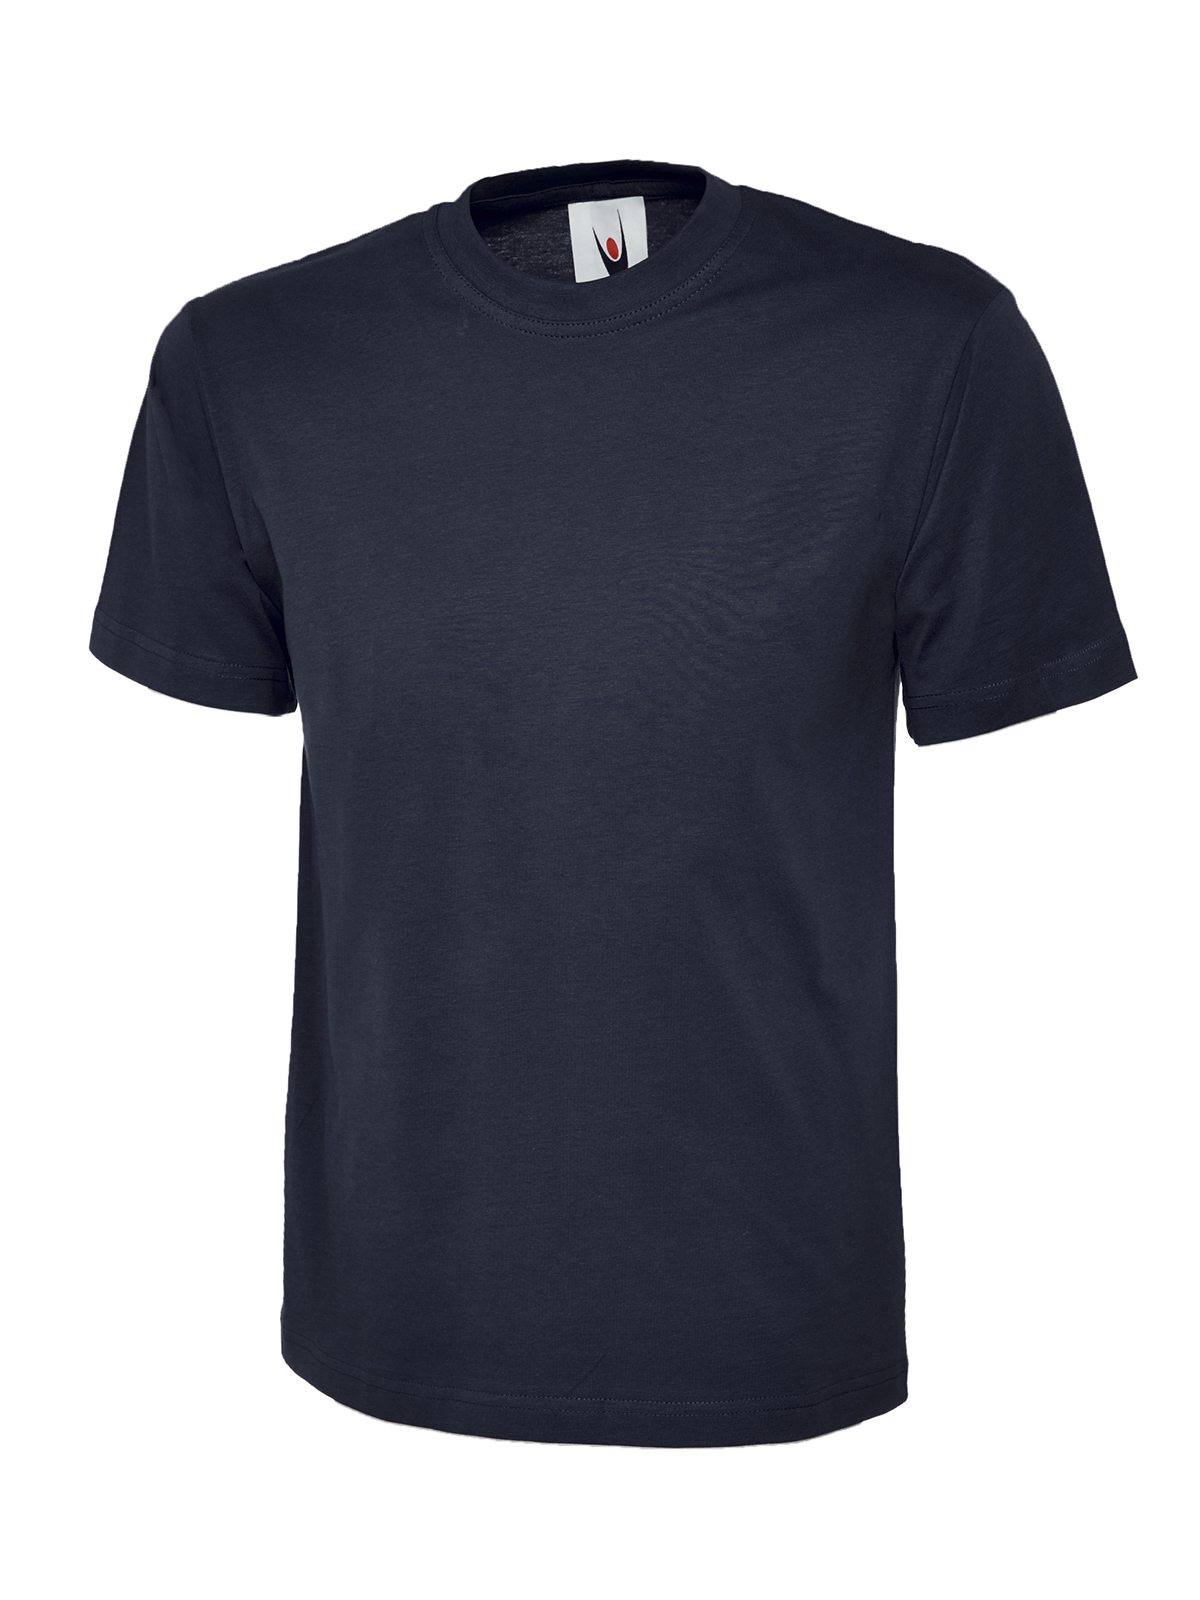 T-shirt, Navy - Size Small